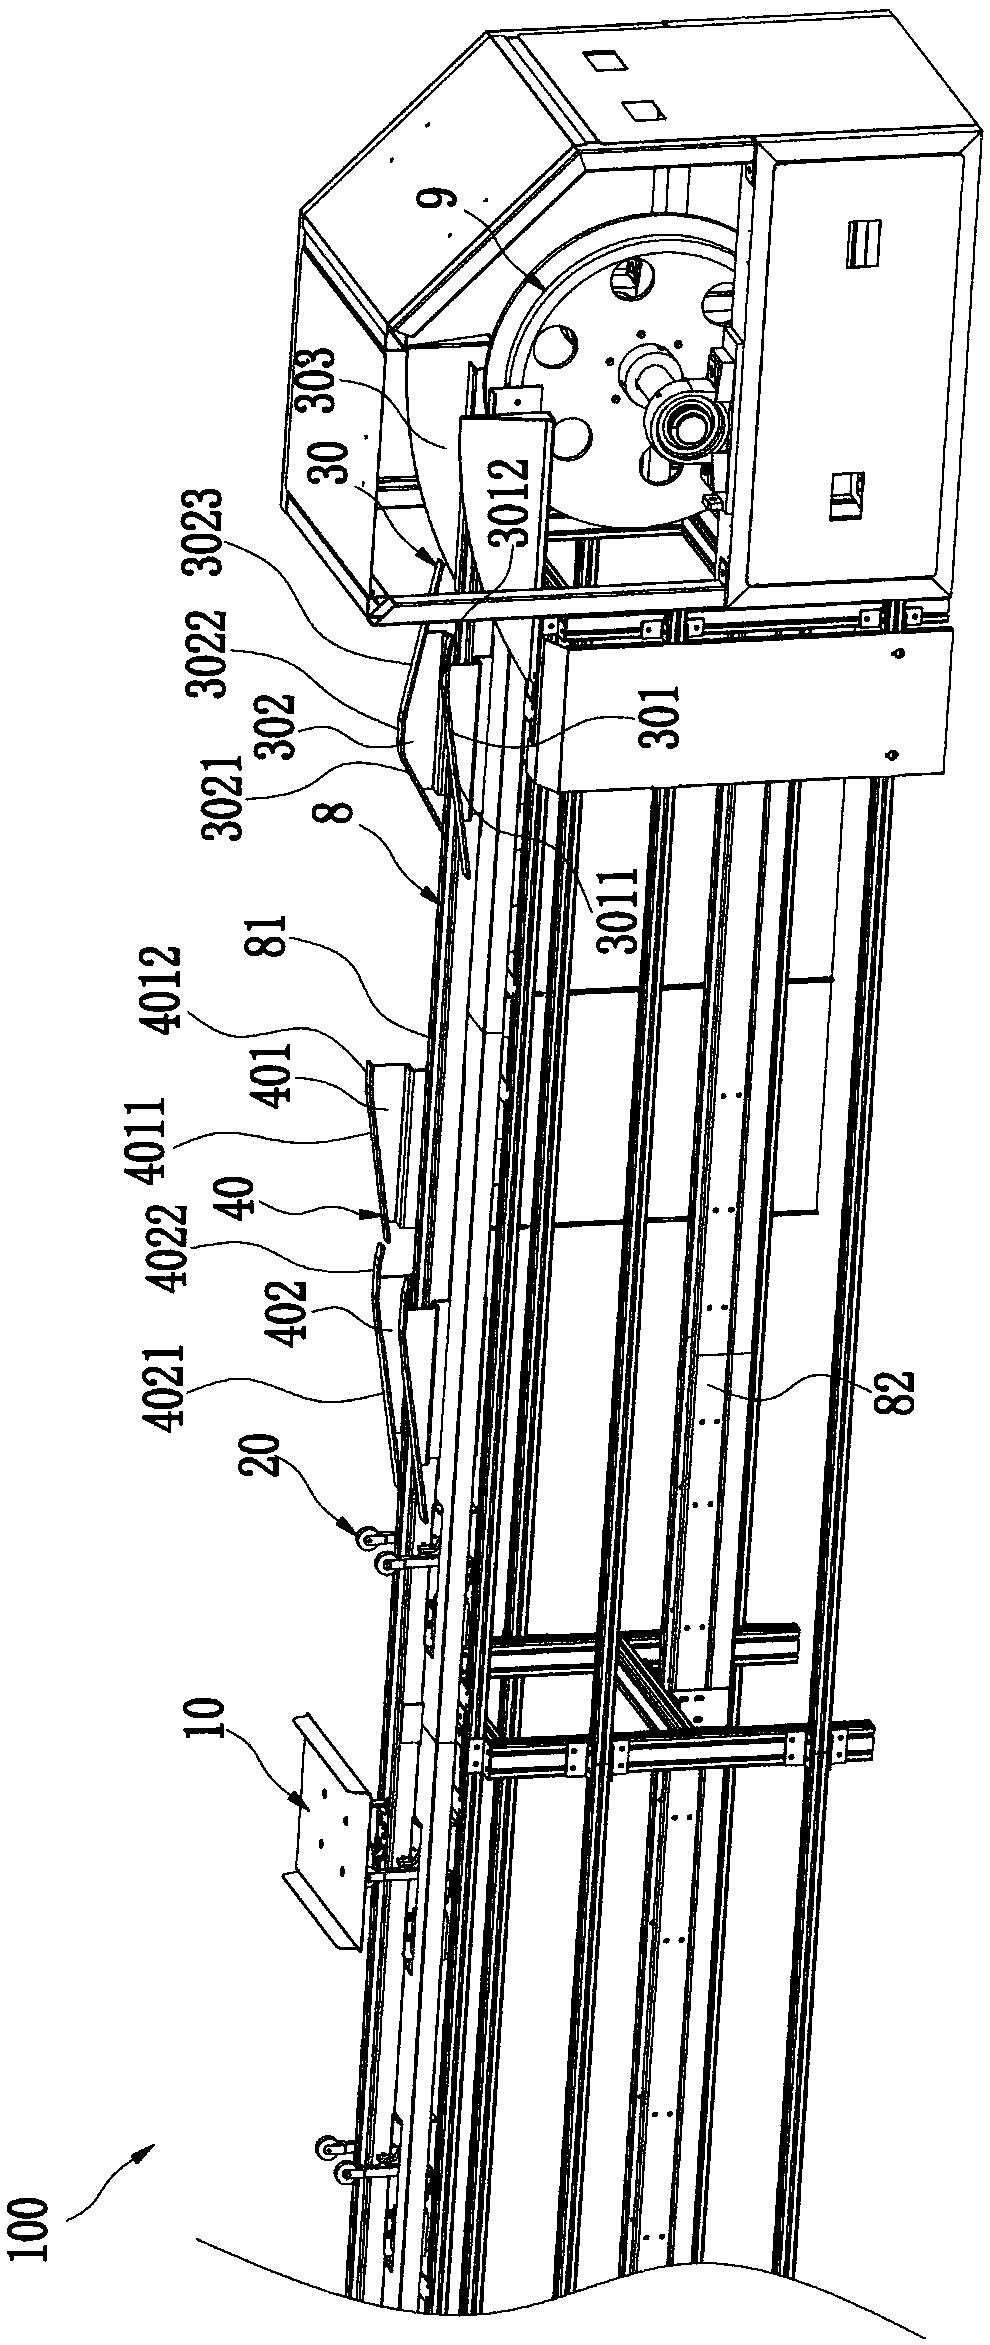 Turning-plate type sorting system